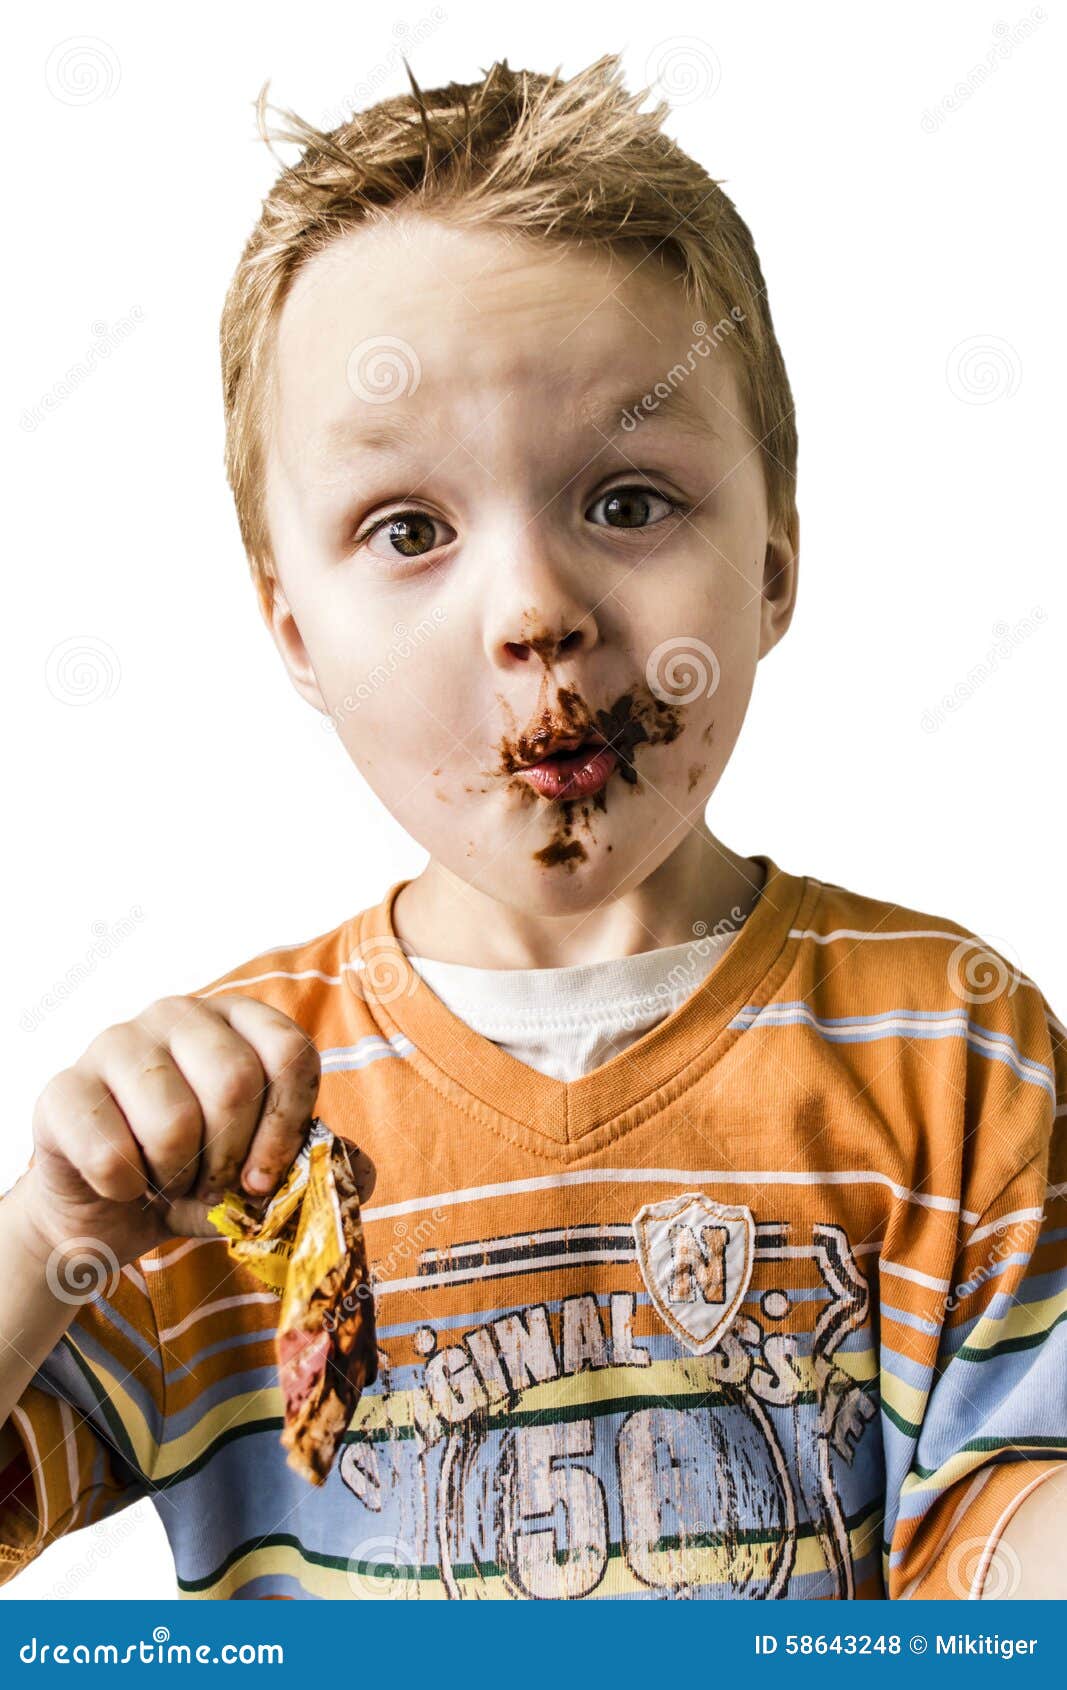 Child and chocolate stock photo. Image of wrappers, child - 58643248